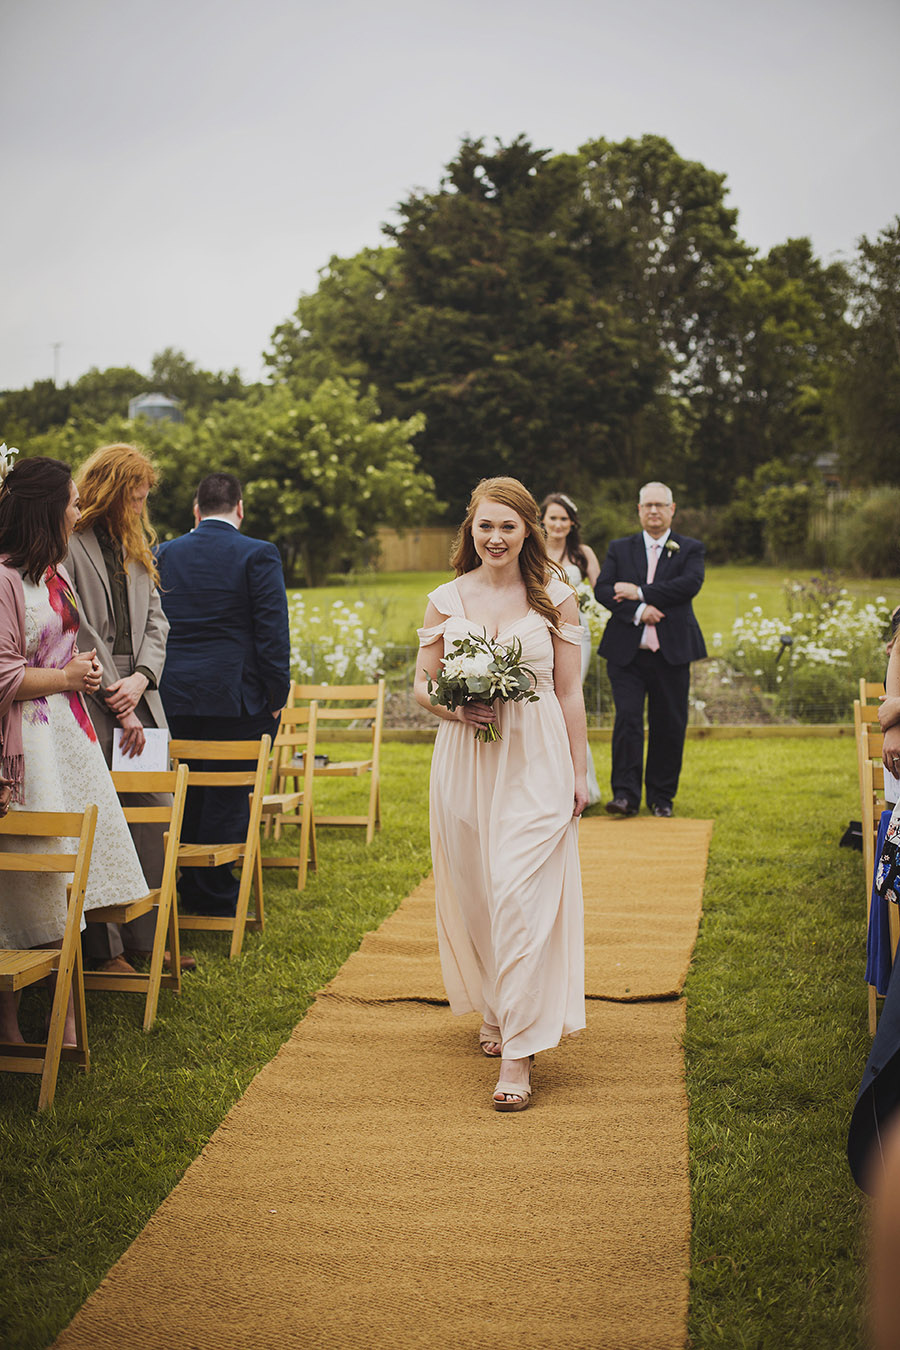 Relaxed outdoor wedding at Cott Farm Barn with images by Heather Birnie Photography on the English Wedding Blog (16)